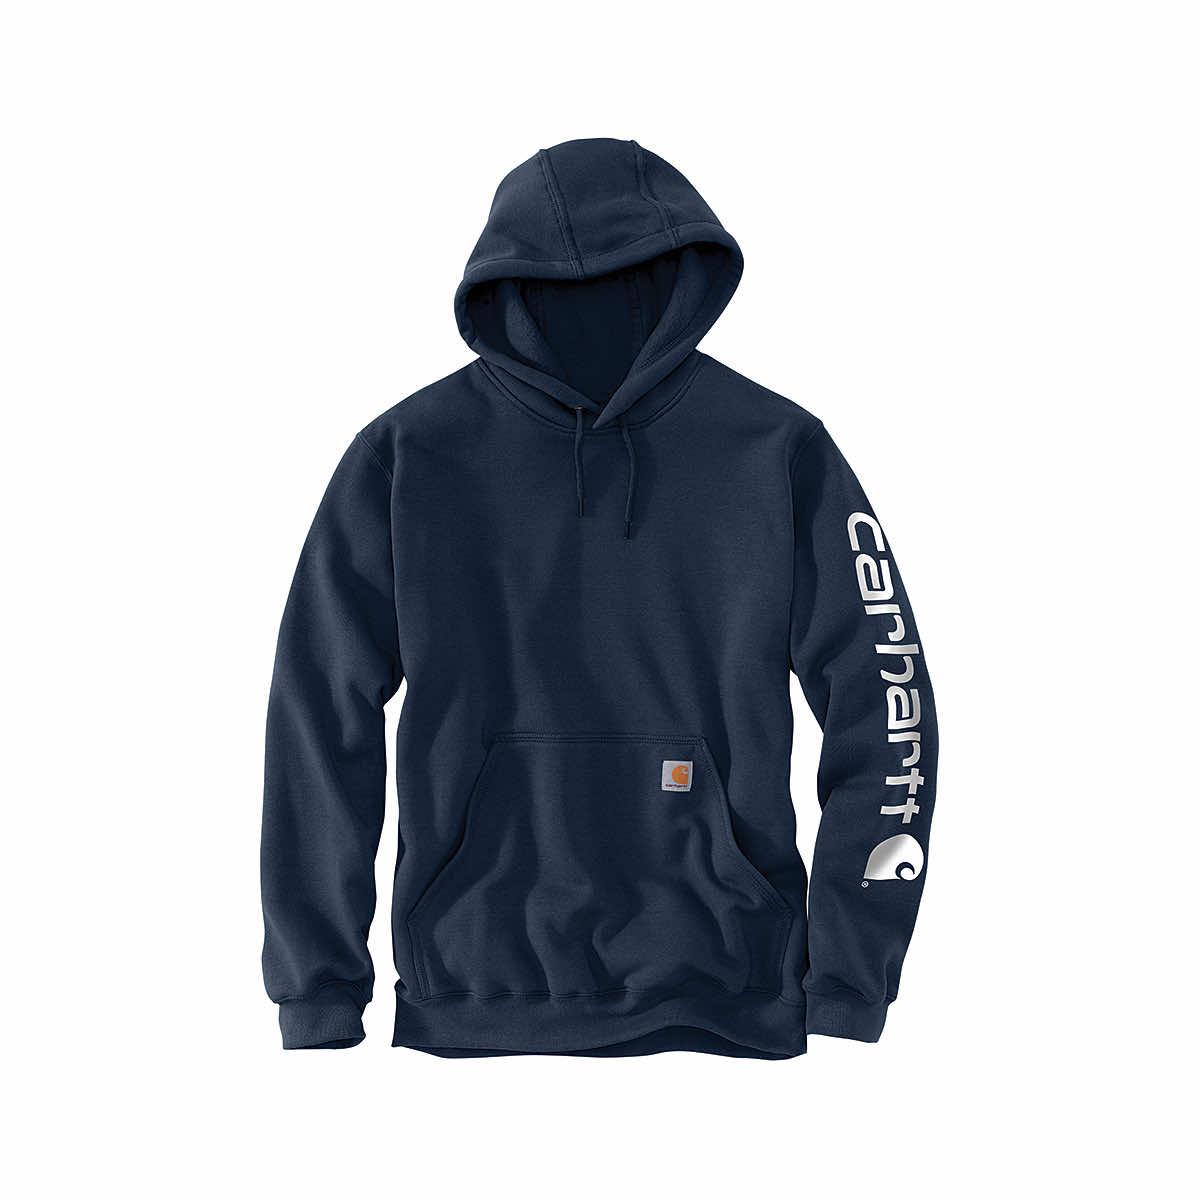  Men's Loose Fit Midweight Logo Sleeve Graphic Hoodie